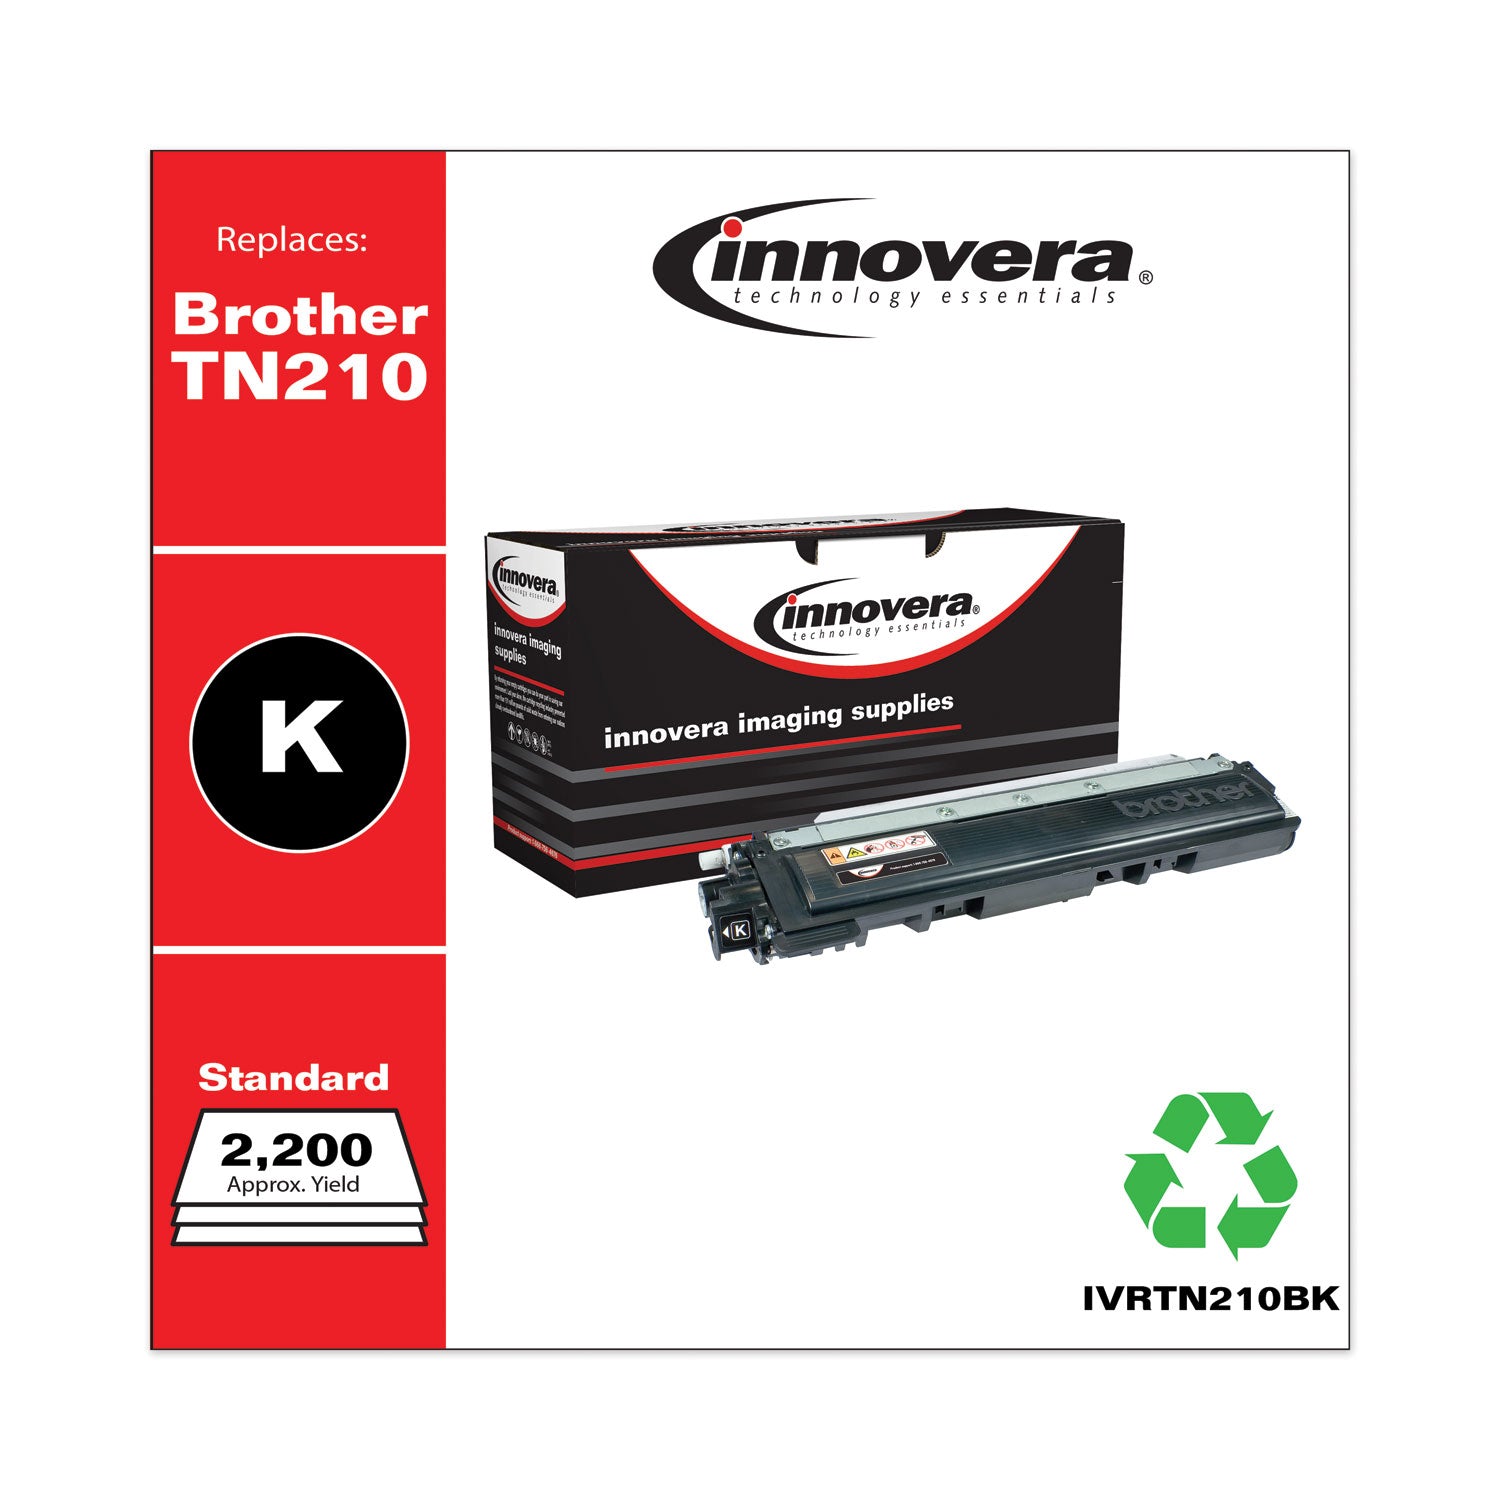 Remanufactured Black Toner, Replacement for TN210BK, 2,200 Page-Yield, Ships in 1-3 Business Days - 